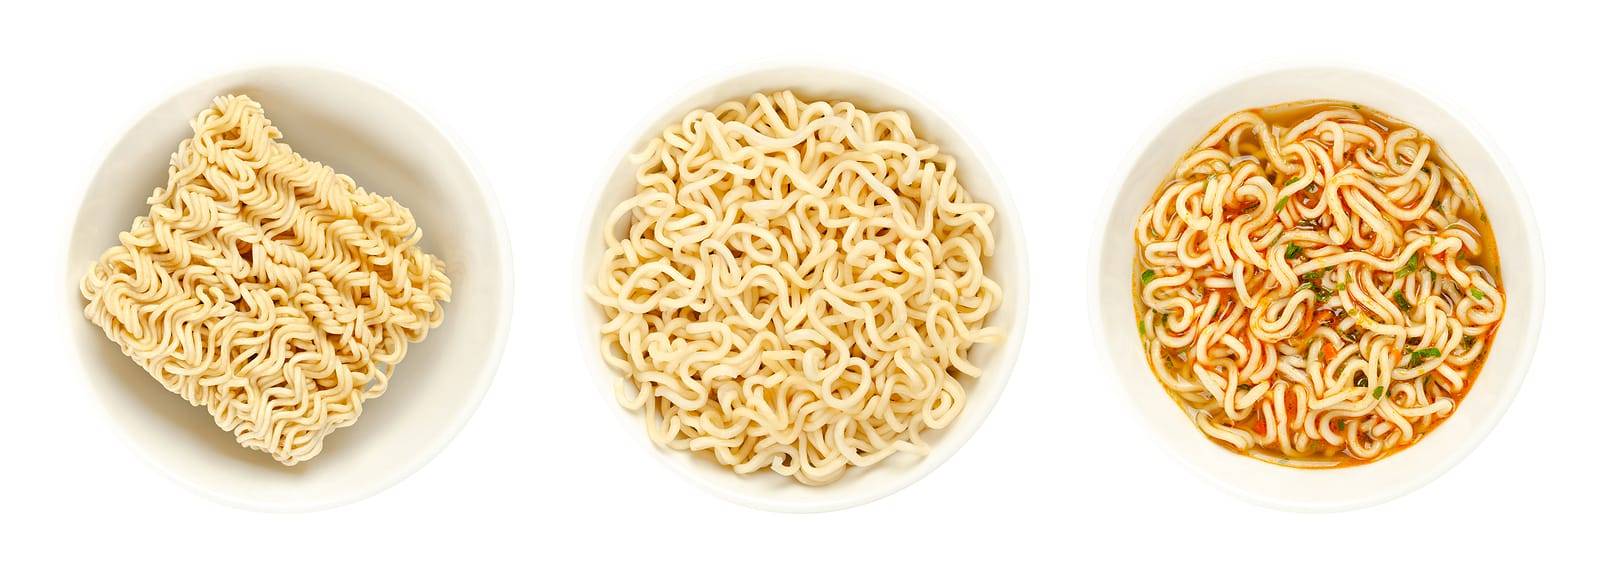 Some Easy Tips to Improve Your Ramen Noodles